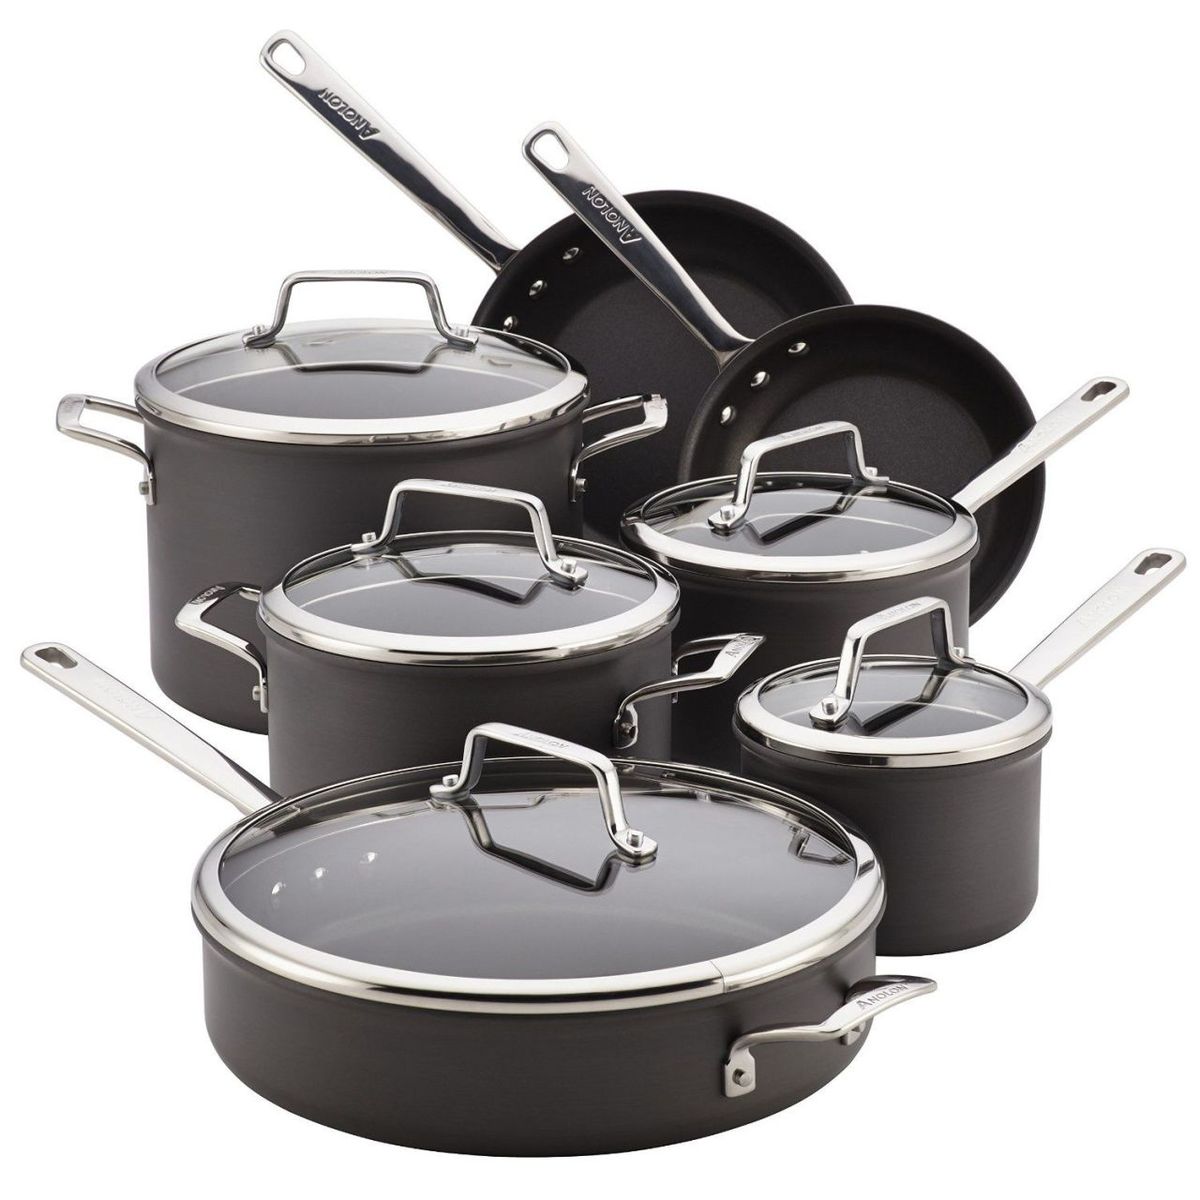 Anolon Non-Stick Cookware Falsely Advertised as Free of 'Forever